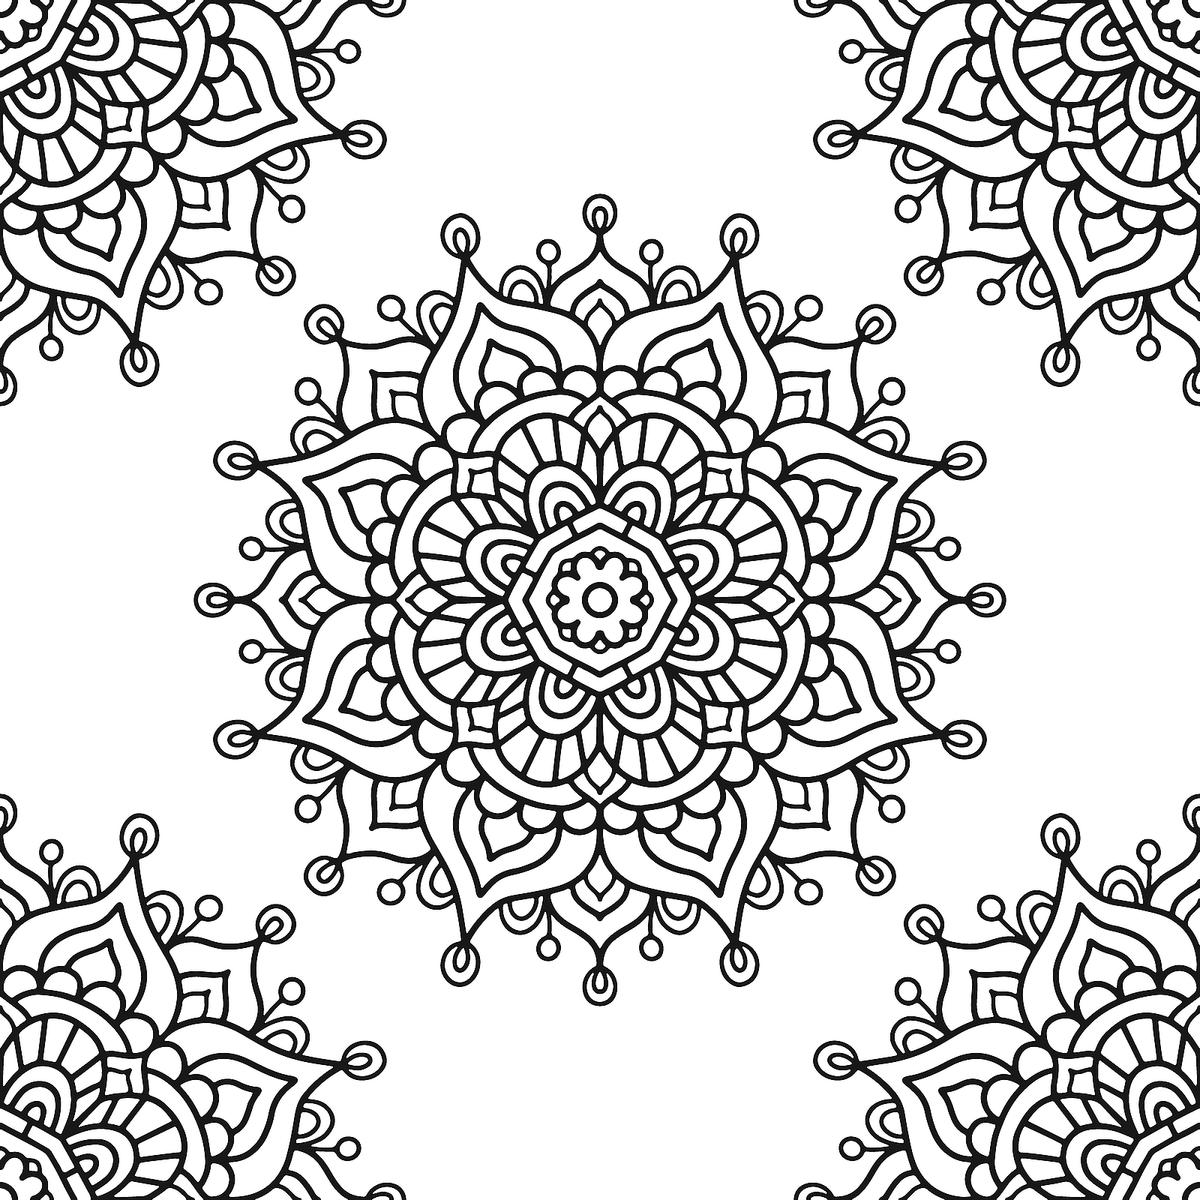 Mandala Coloring Pages: Free Printable Coloring Pages of Mandalas for Adults  & Kids | Printables | 30Seconds Mom